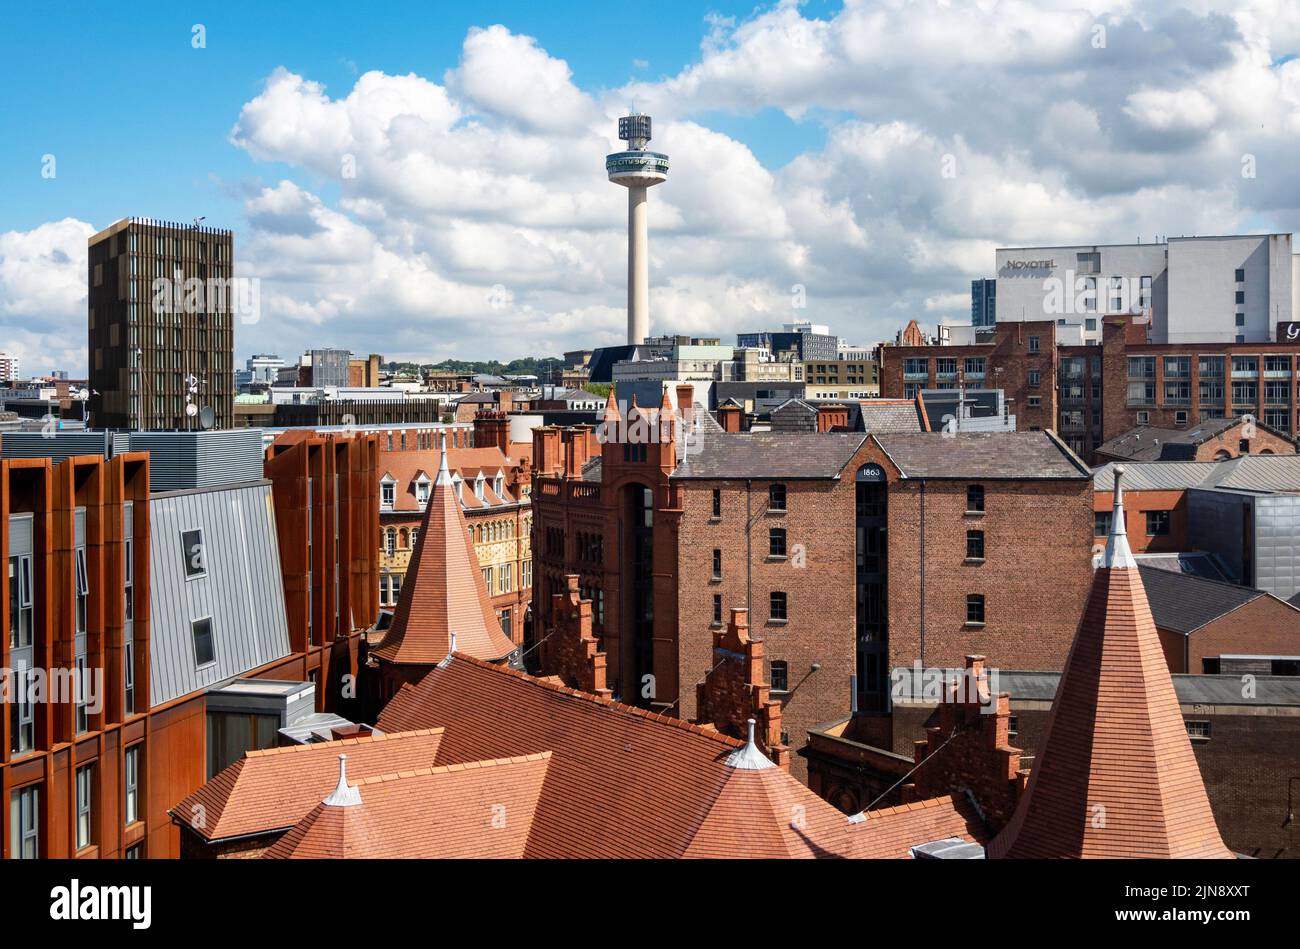 Looking out over the Liverpool rooftops at the Radio City 96.7 Tower Stock Photo